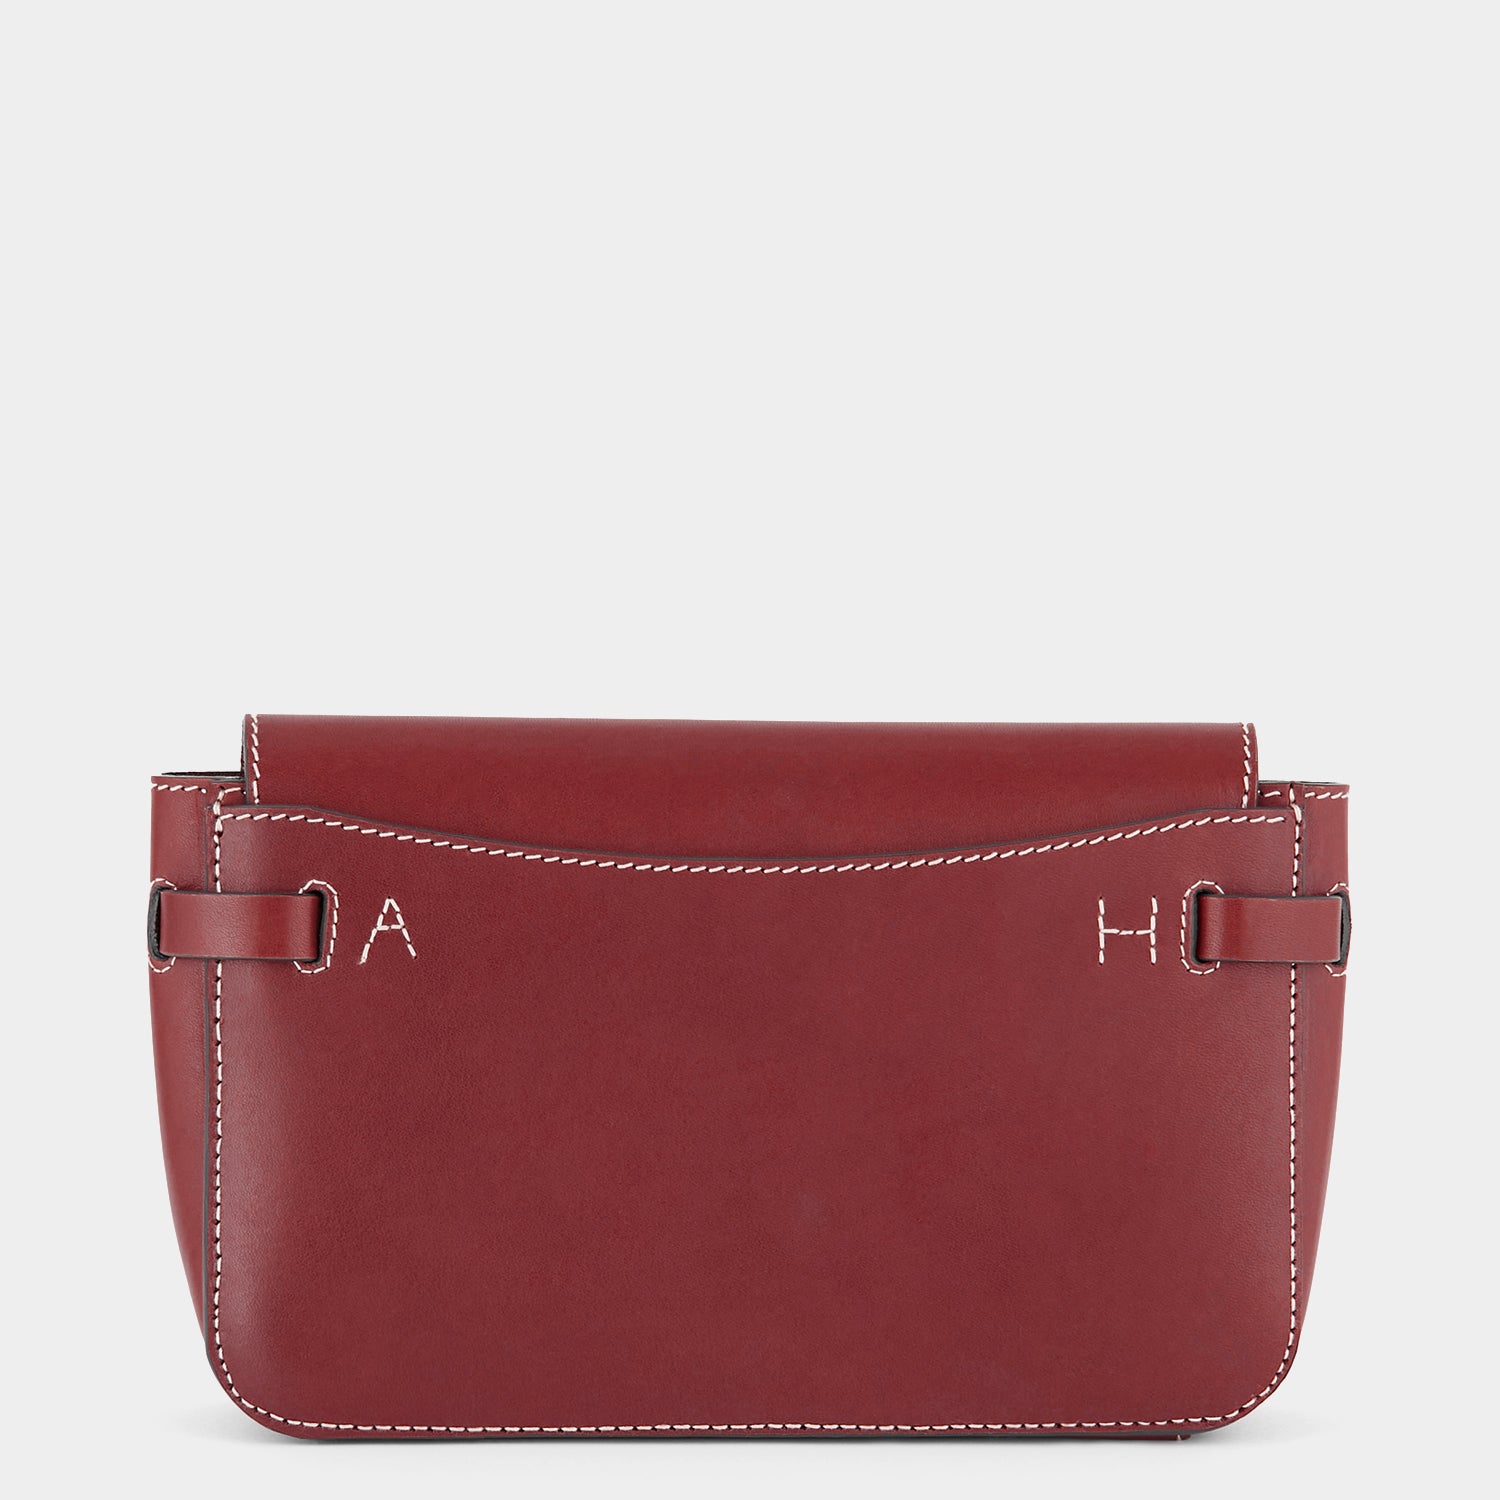 Return to Nature Clutch -

                  
                    Compostable Leather in Rosewood -
                  

                  Anya Hindmarch EU
